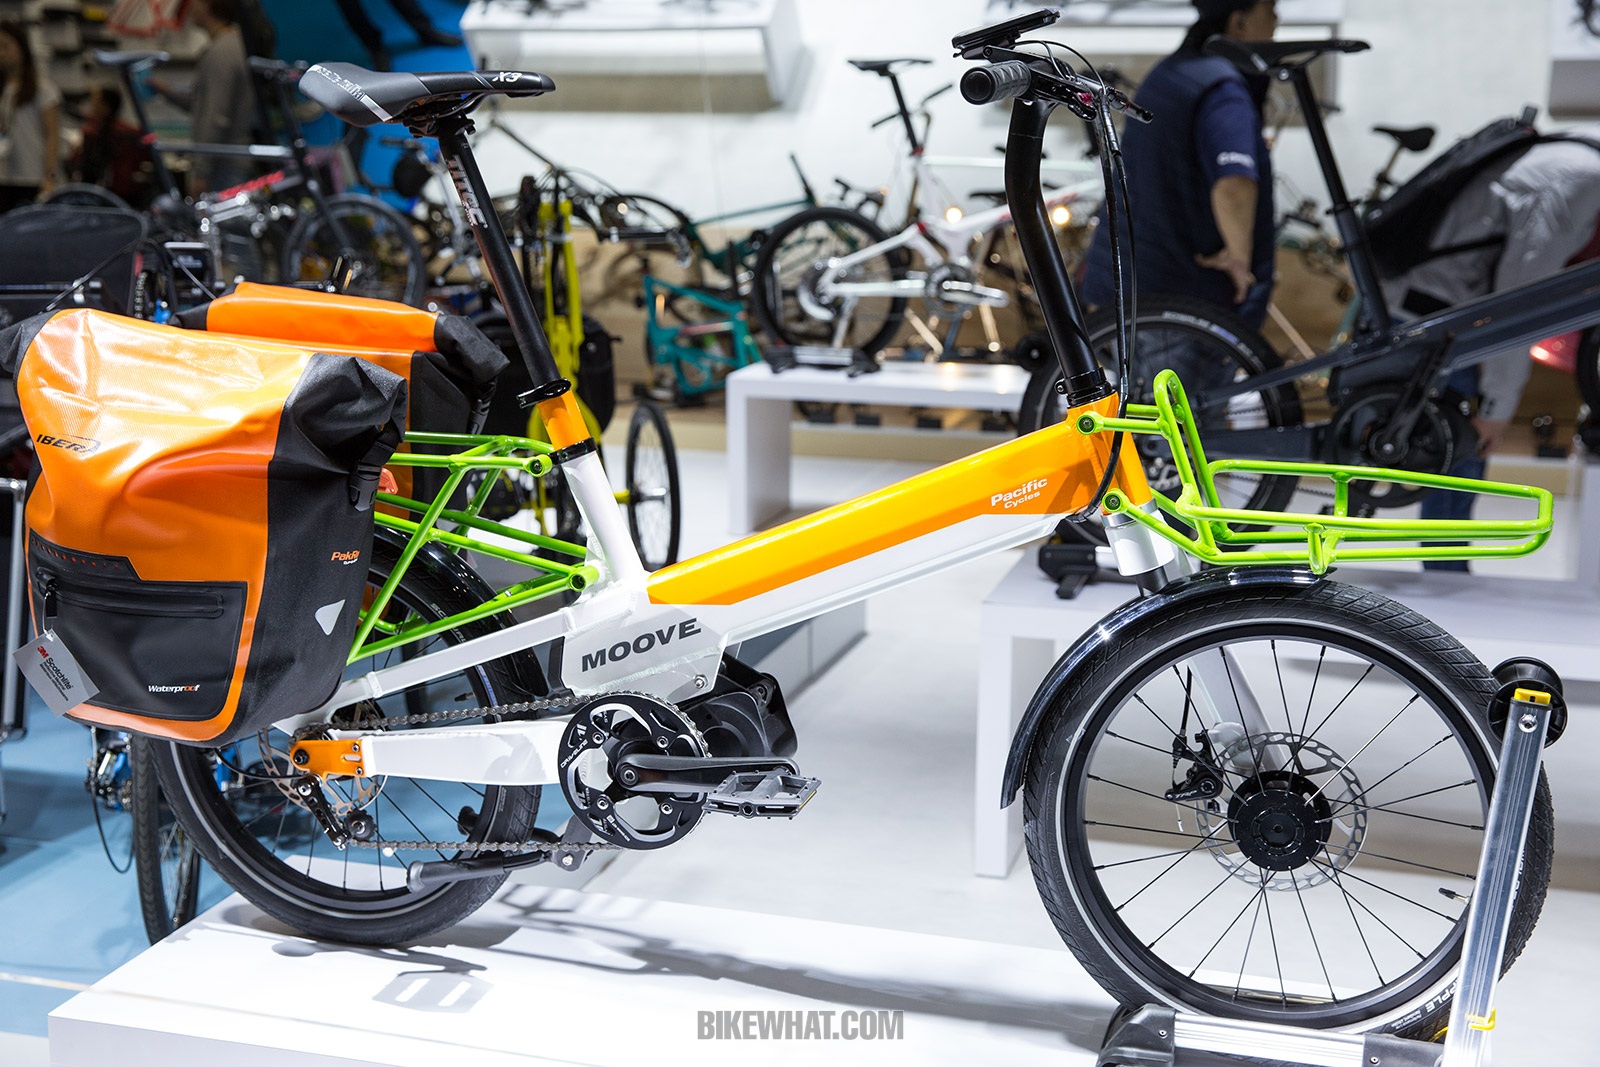 Feature_TaipeiCycle_2019_Moove_1.jpg